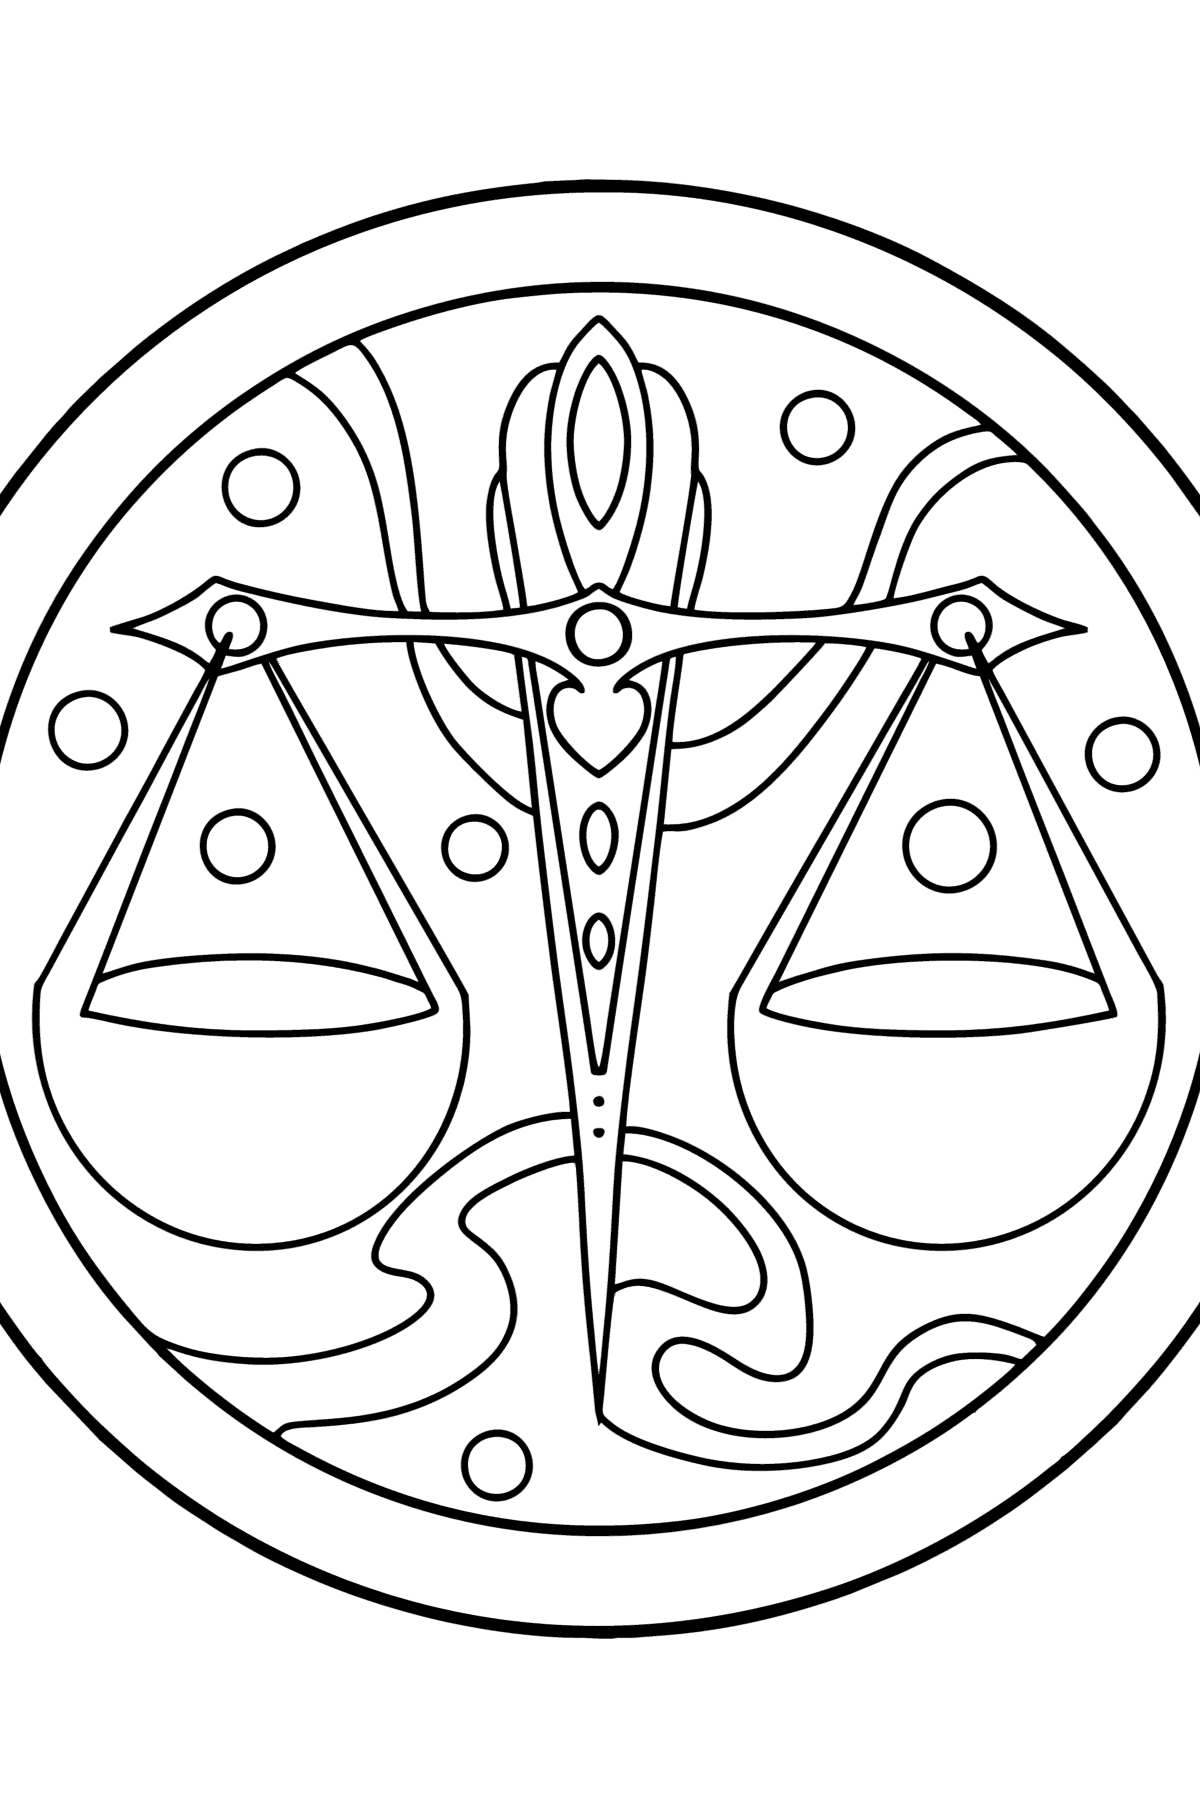 Coloring page for kids - zodiac sign Libra - Coloring Pages for Kids